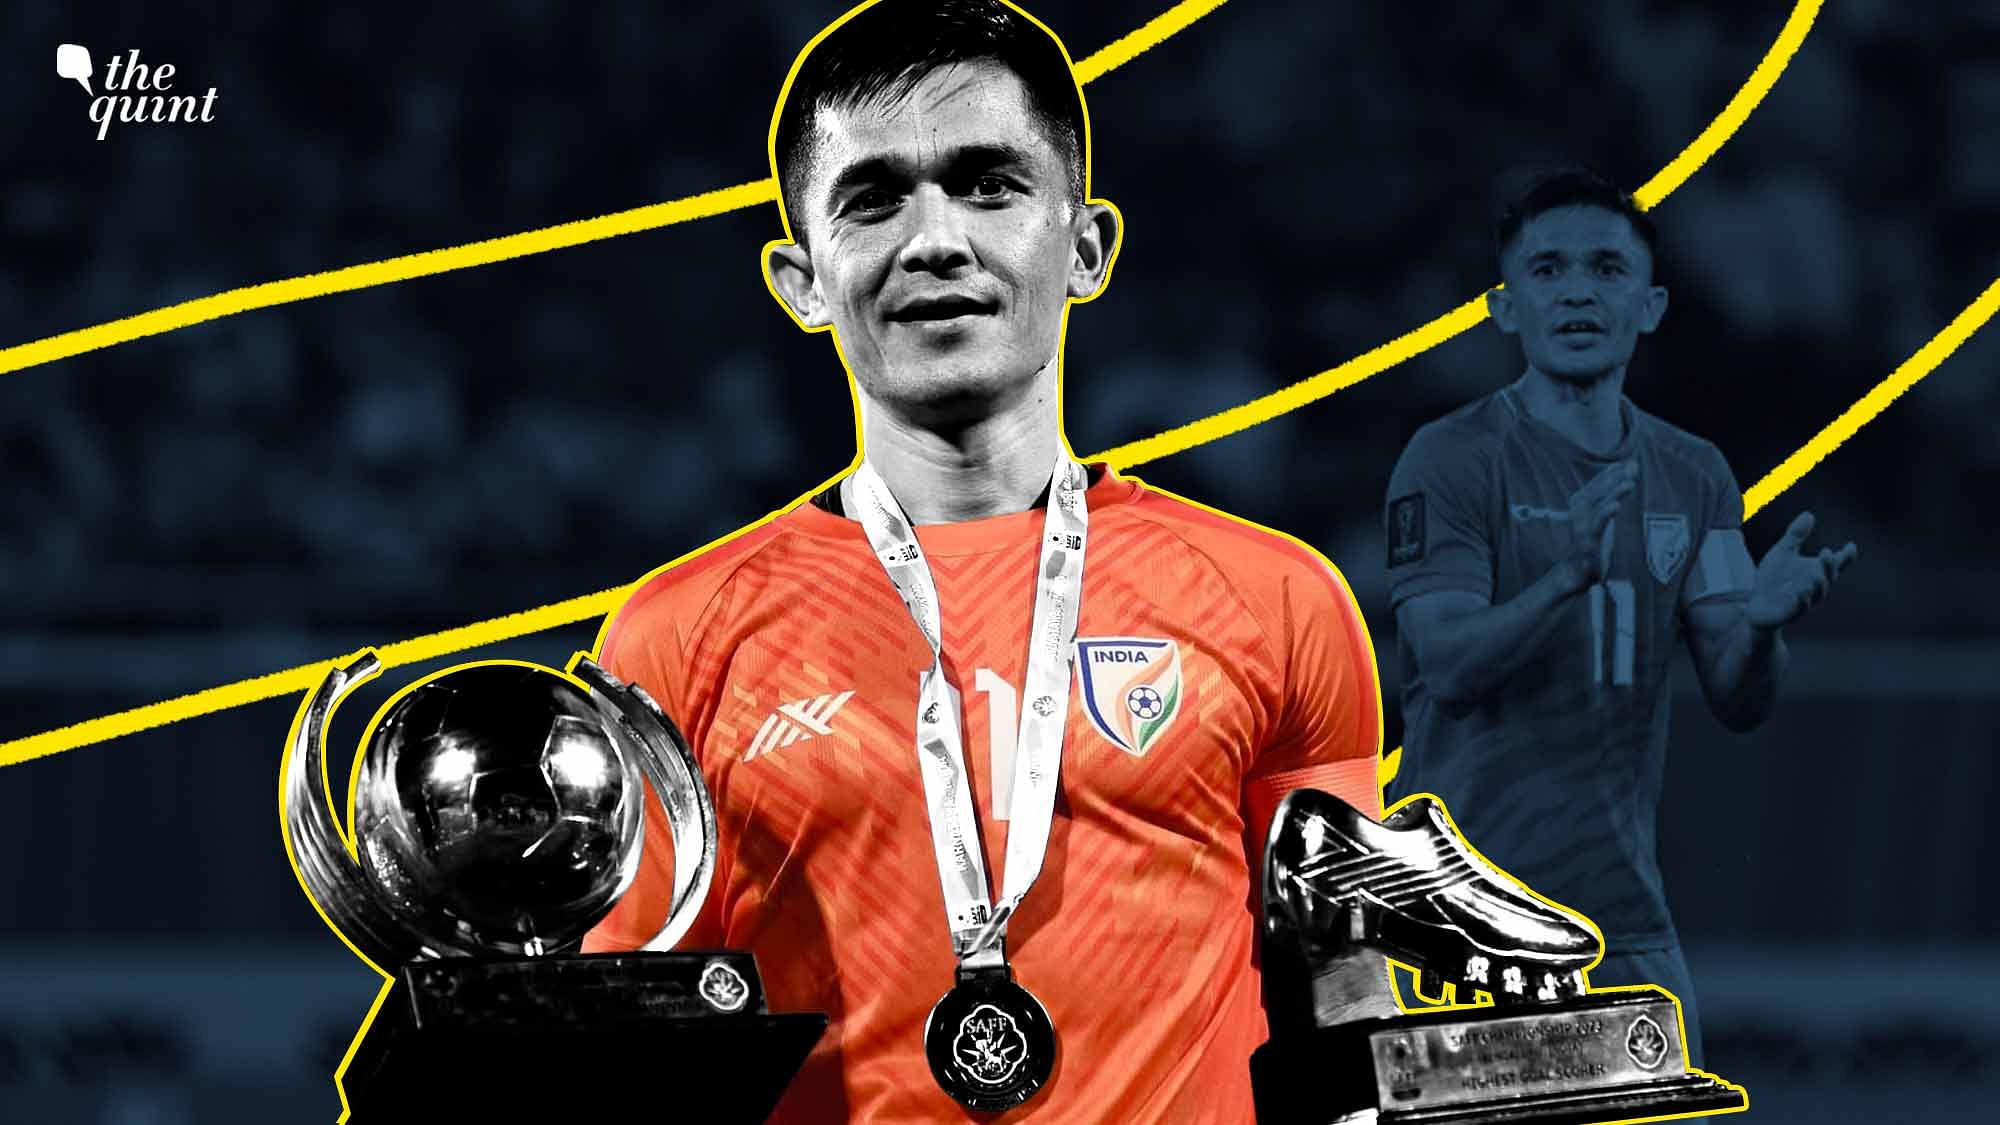 <div class="paragraphs"><p>As Sunil Chhetri retires, we walk down the memory lane and trace his journey in football.</p></div>